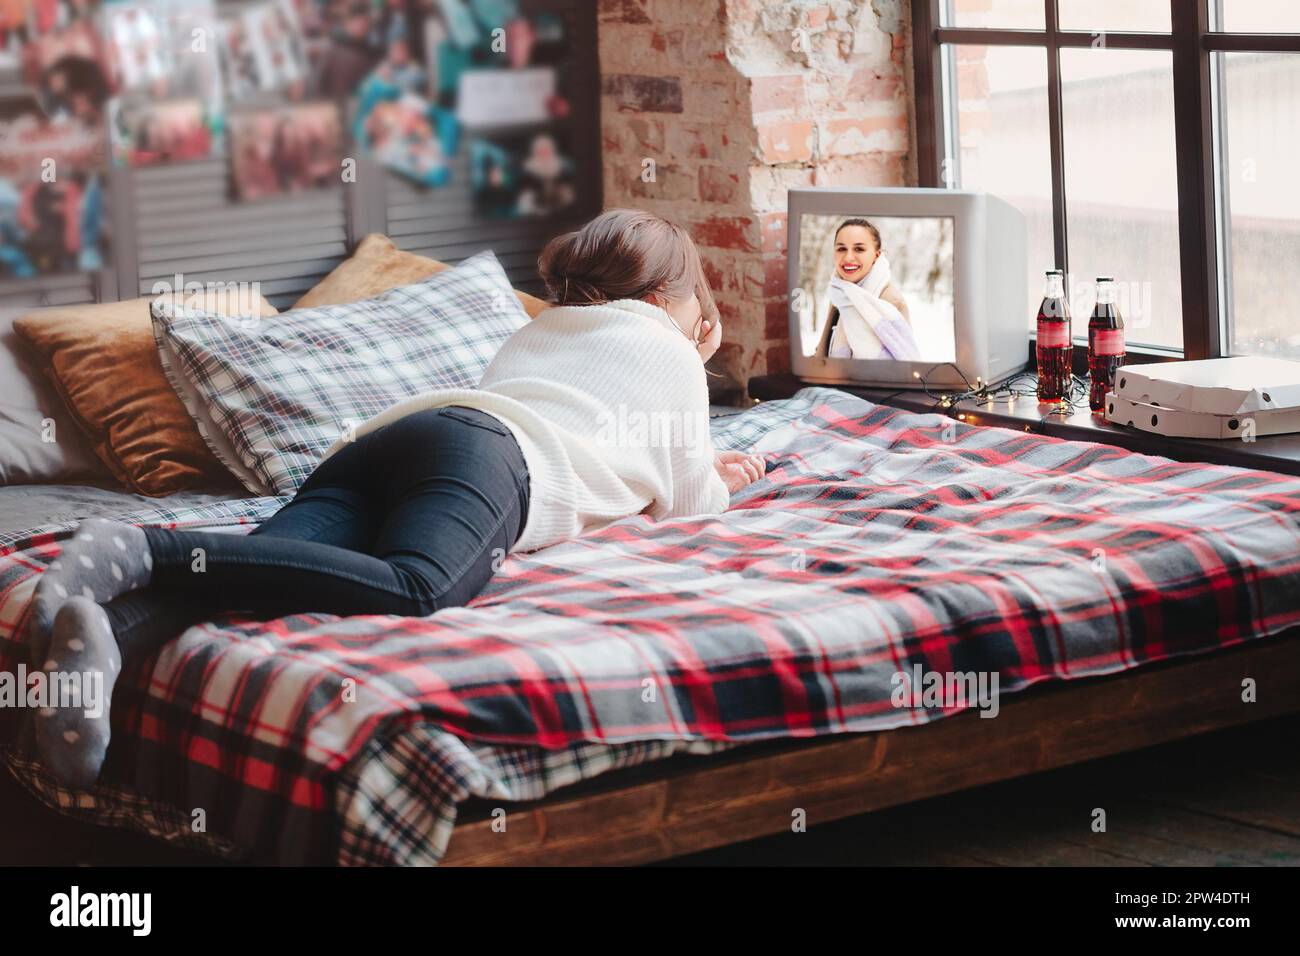 Unrecognizable female relaxing on comfortable bed with checkered blanket and watching retro TV at home Stock Photo